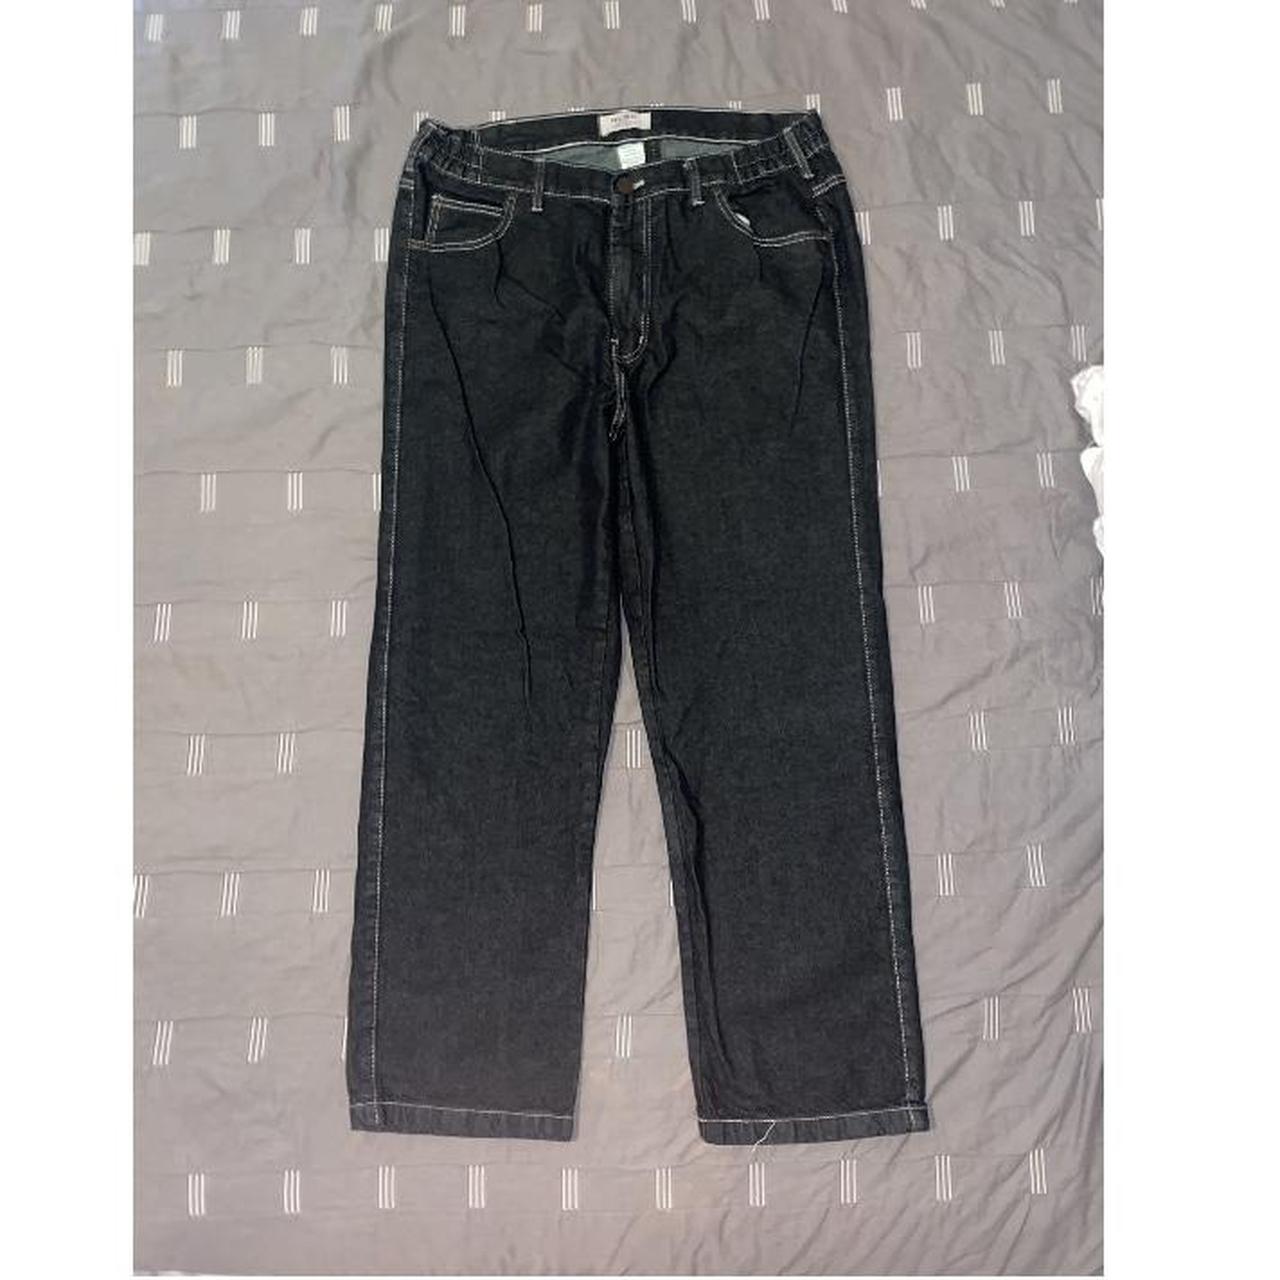 Duke black jeans with white stitching Loose fits,... - Depop